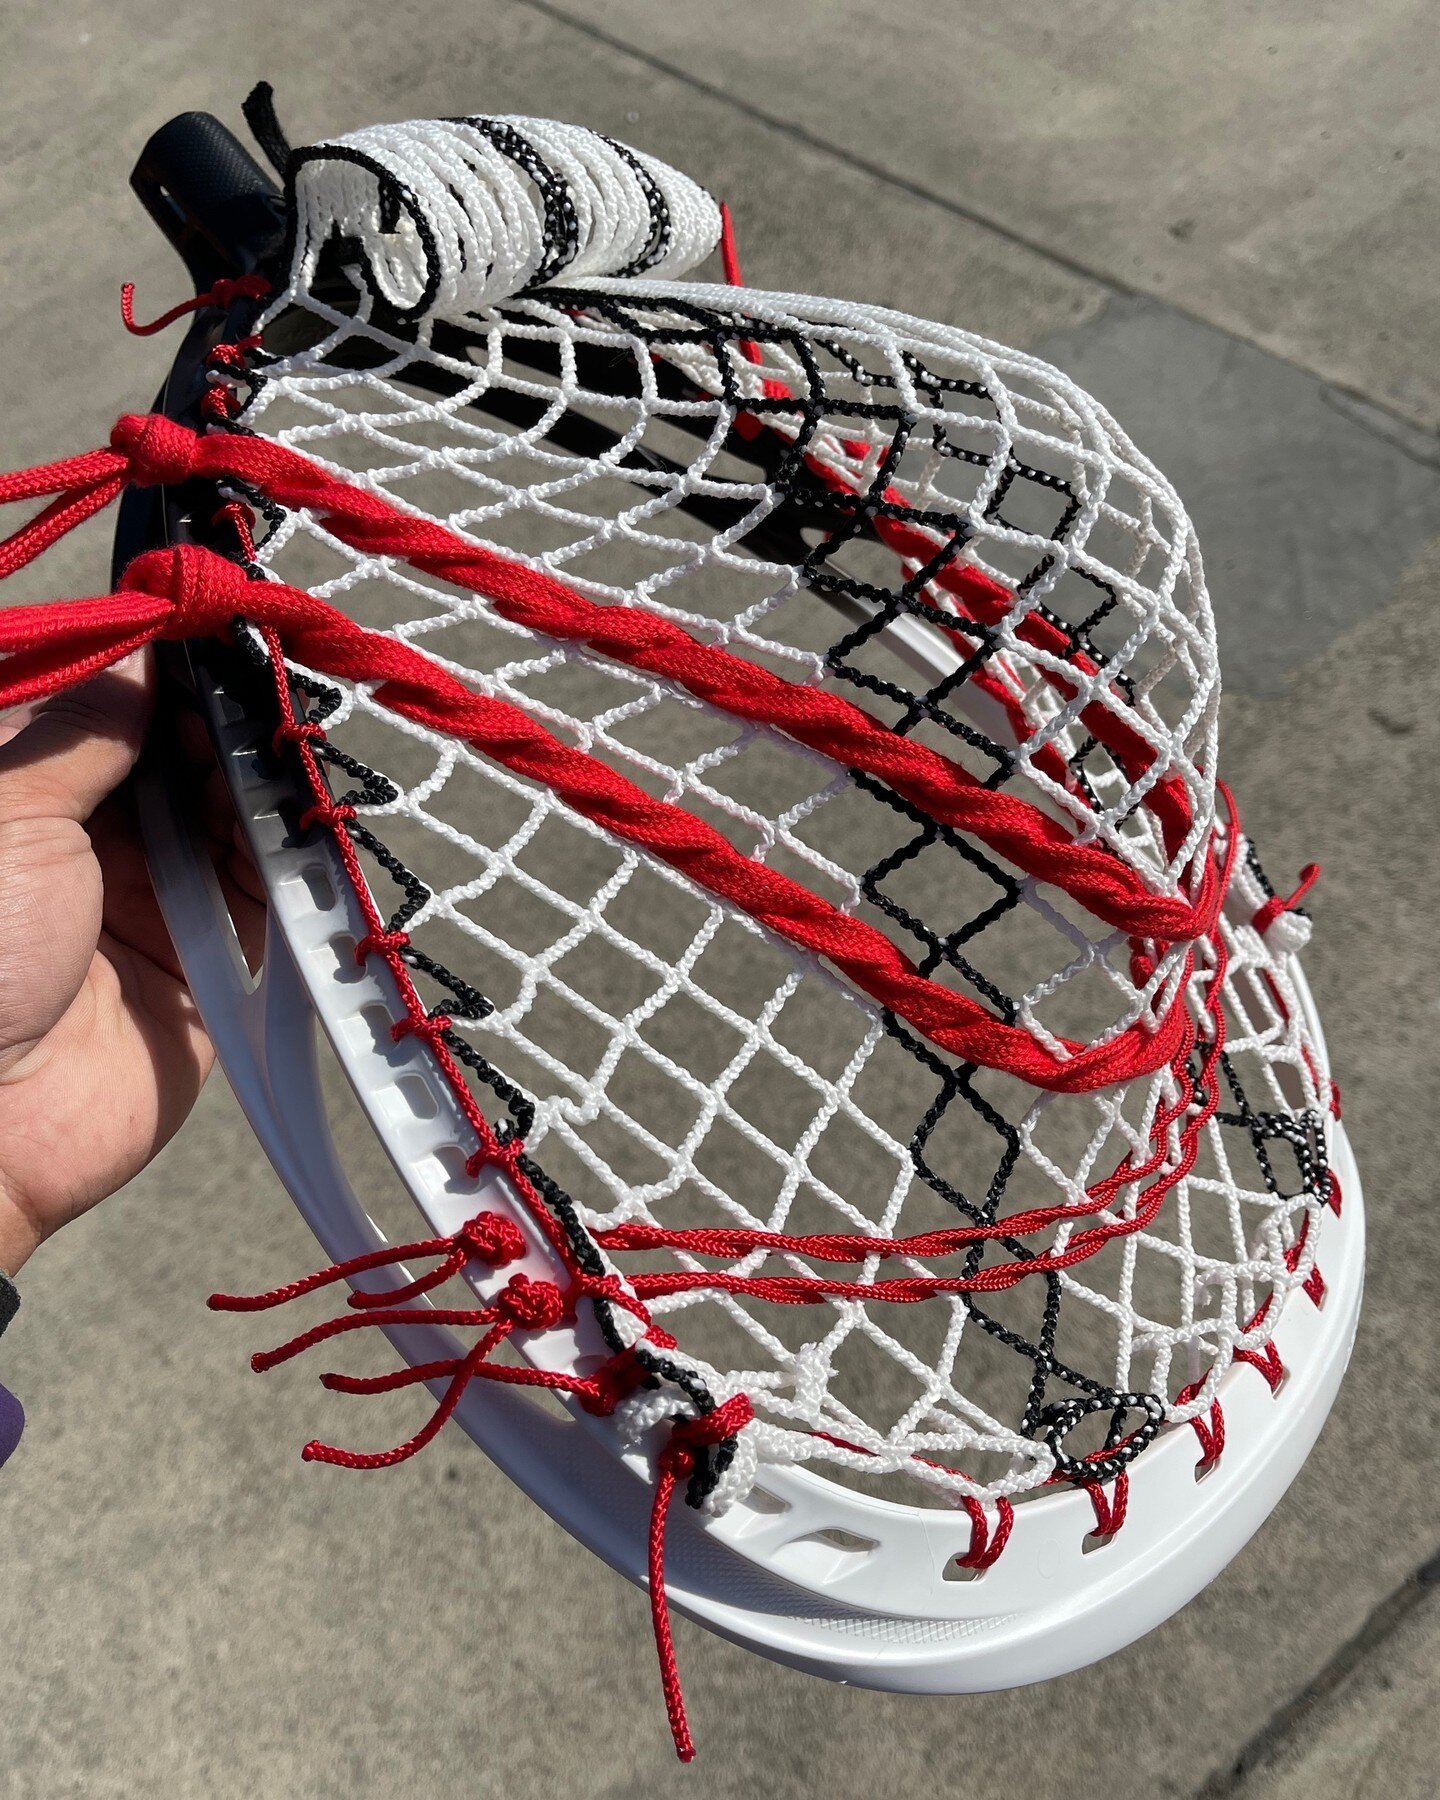 @ecdlax Impact tied up with Impact Mesh for Bay Area stud @aiden.lemon 🧱🧱

#nsalax #nsastrung #nsadyed #customstrung #customdyed #norcallax #bayarealax #lax #lacrosse #laxstick #lacrossestick  #lacrosselife #laxislife #laxhead  #lacrosseplayer #lac